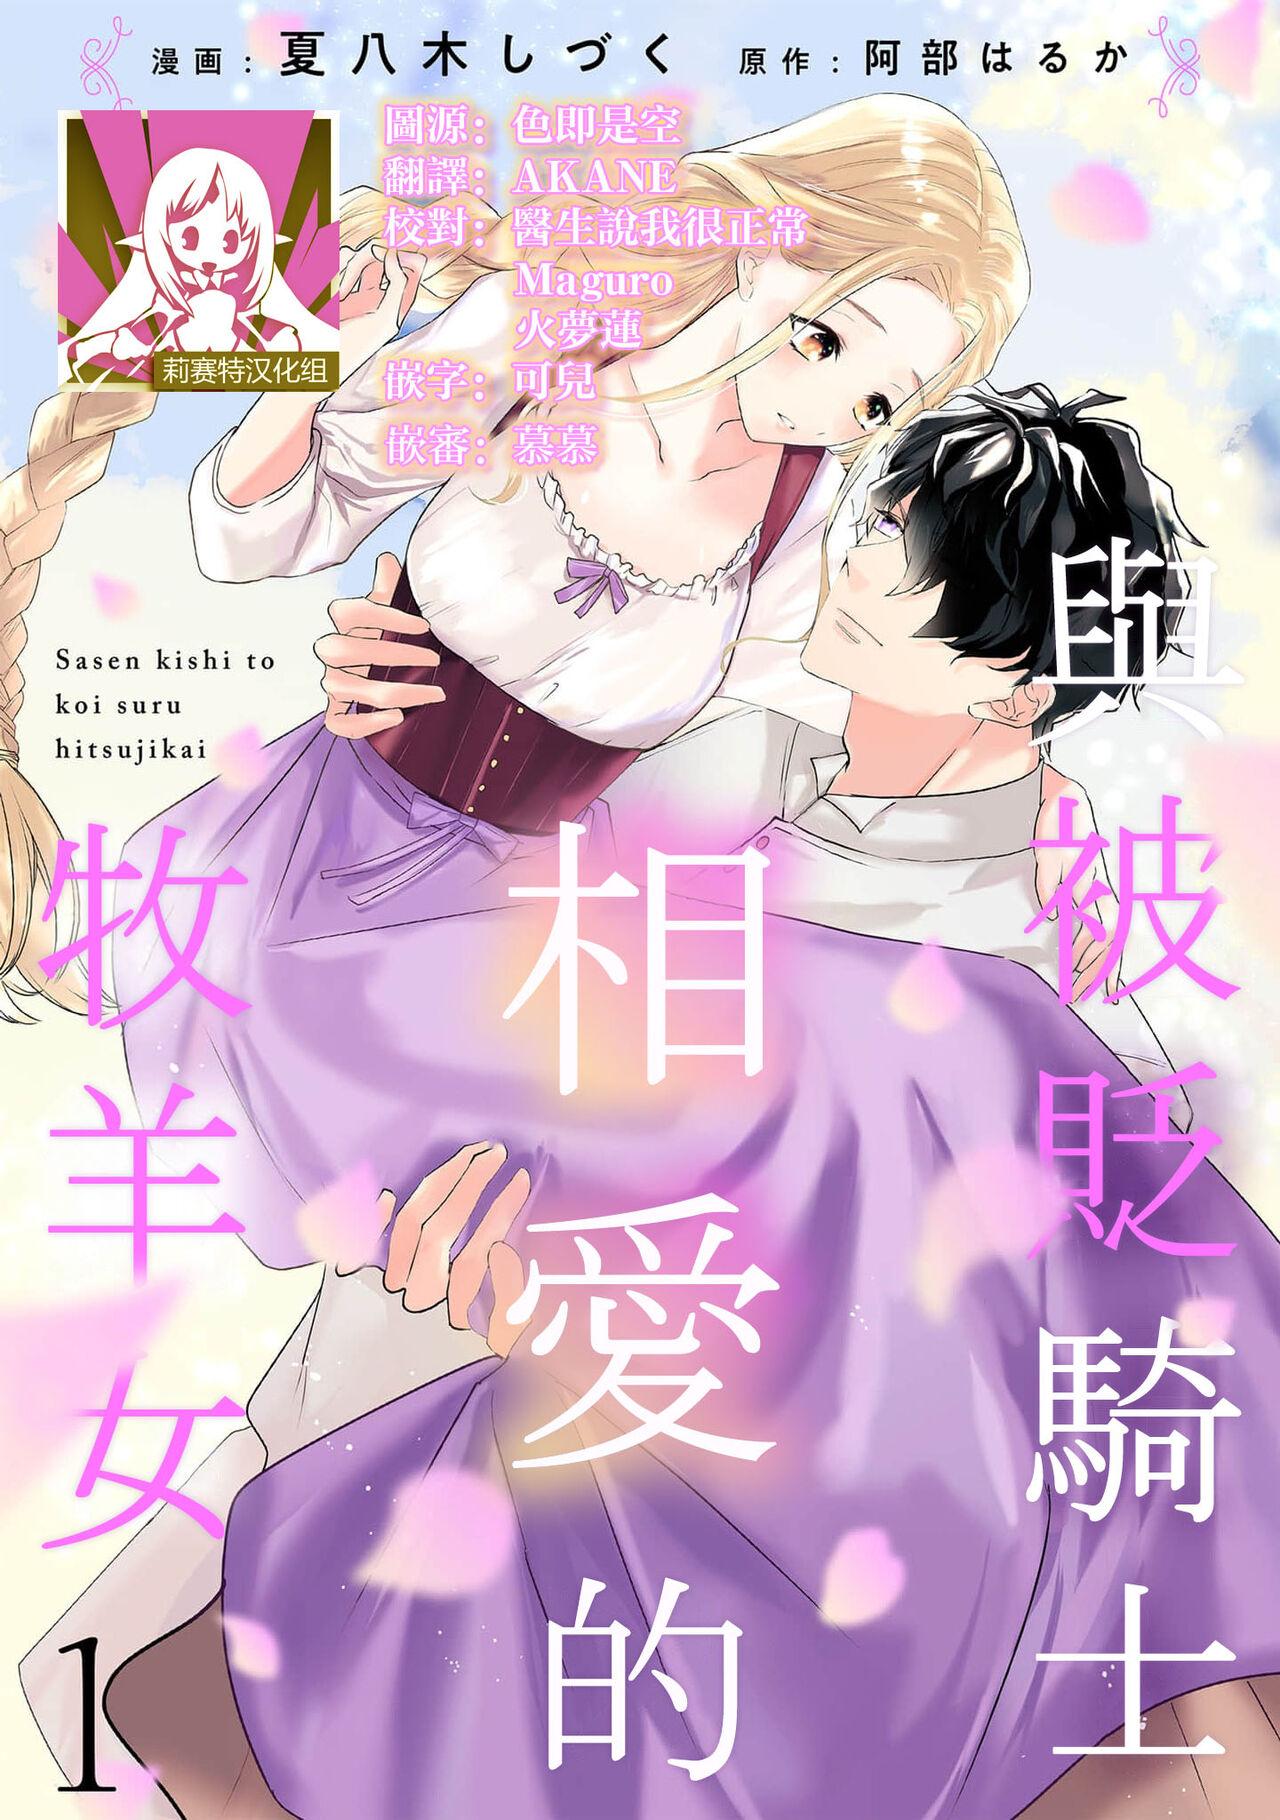 A shepherd in love with a demoted knight | 与被贬骑士相爱的牧羊女1 1